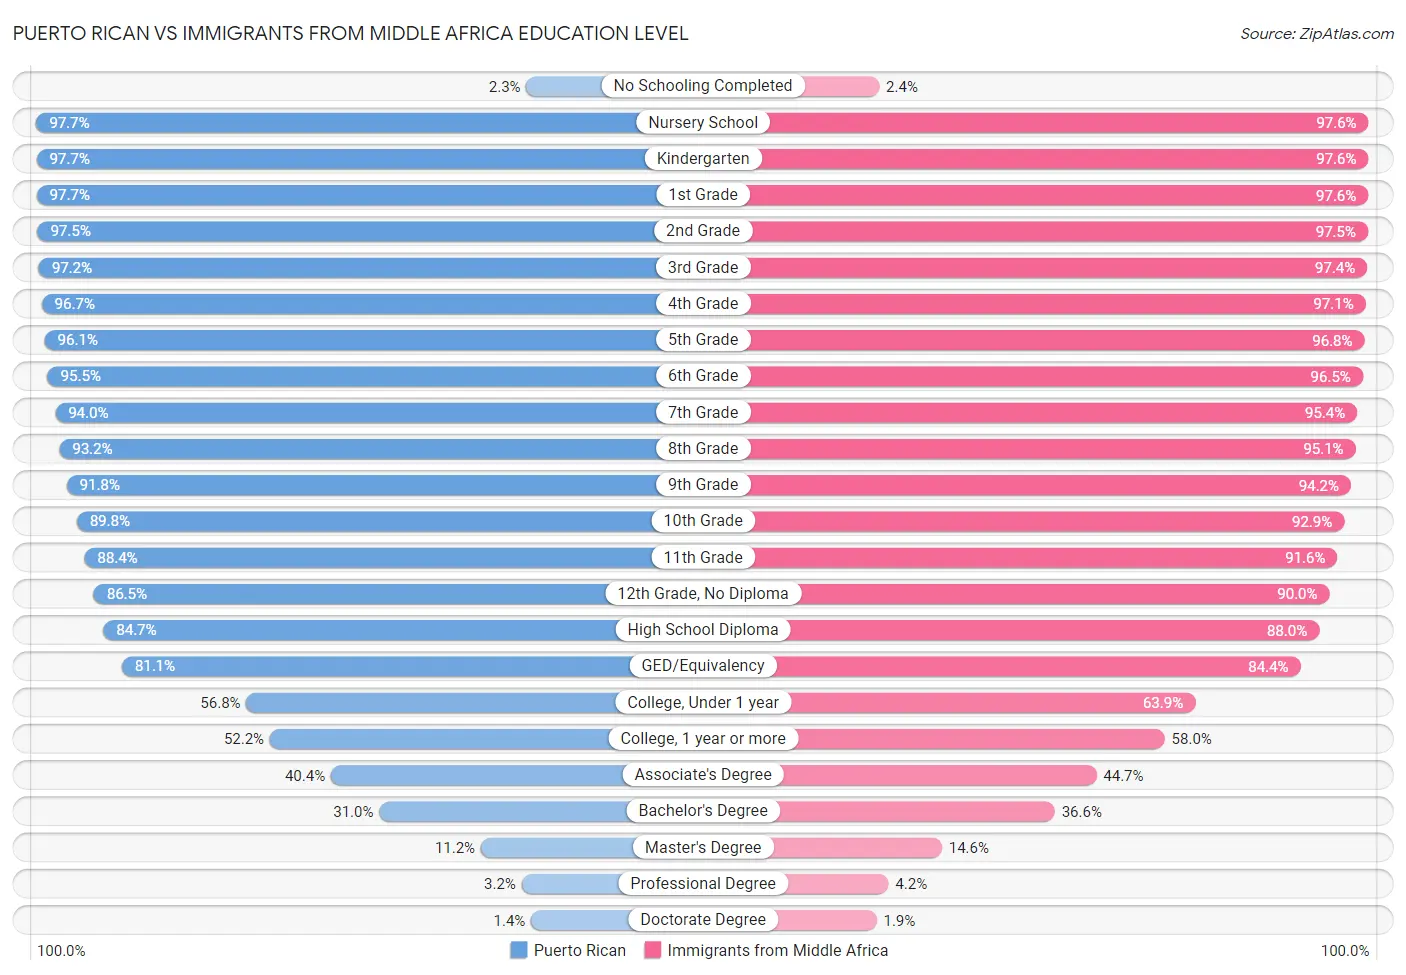 Puerto Rican vs Immigrants from Middle Africa Education Level